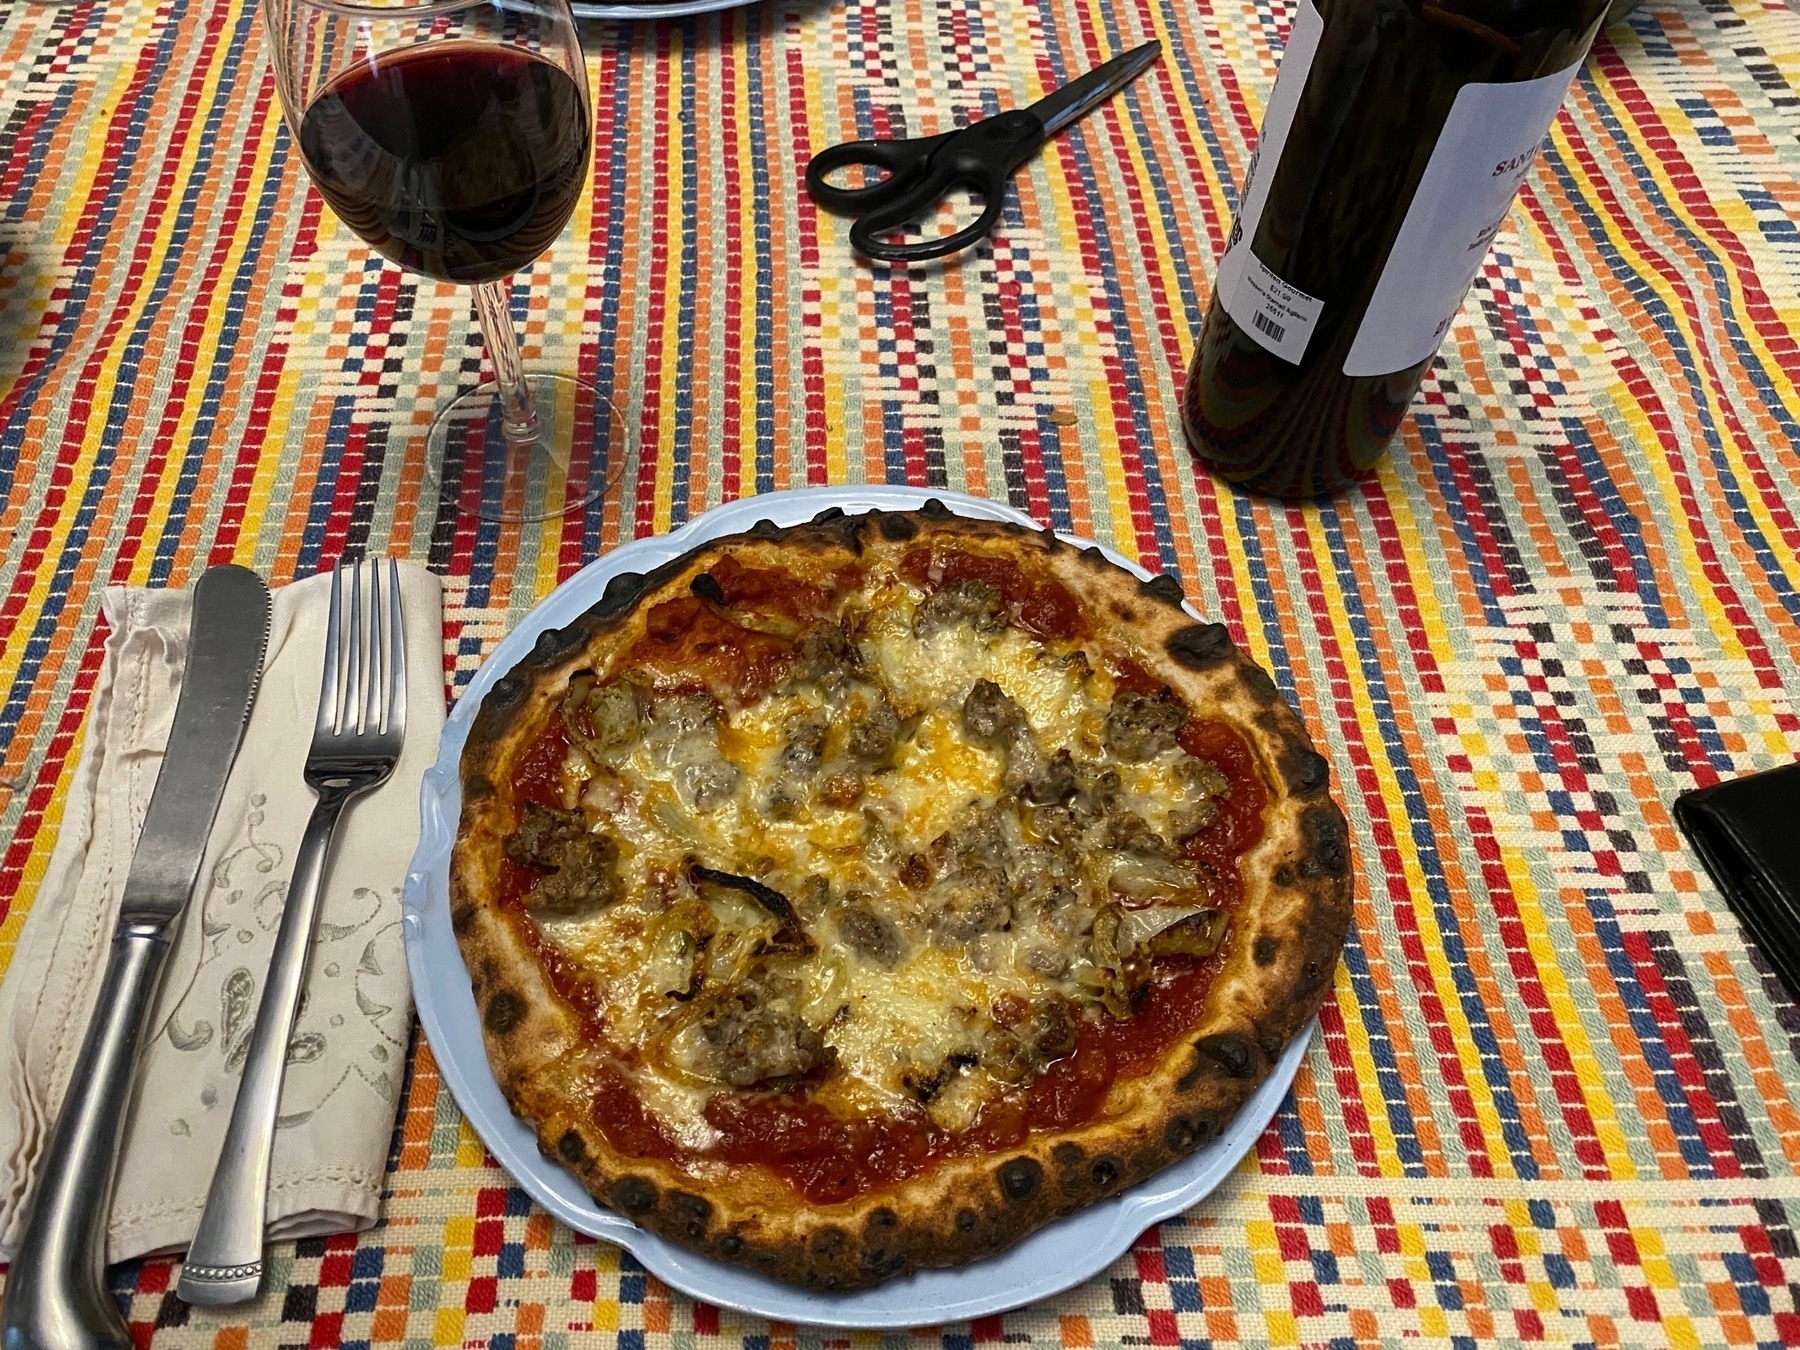 Small pizza on a plate, on a striped tablecloth with utensils, wine glass, and wine bottle nearby.